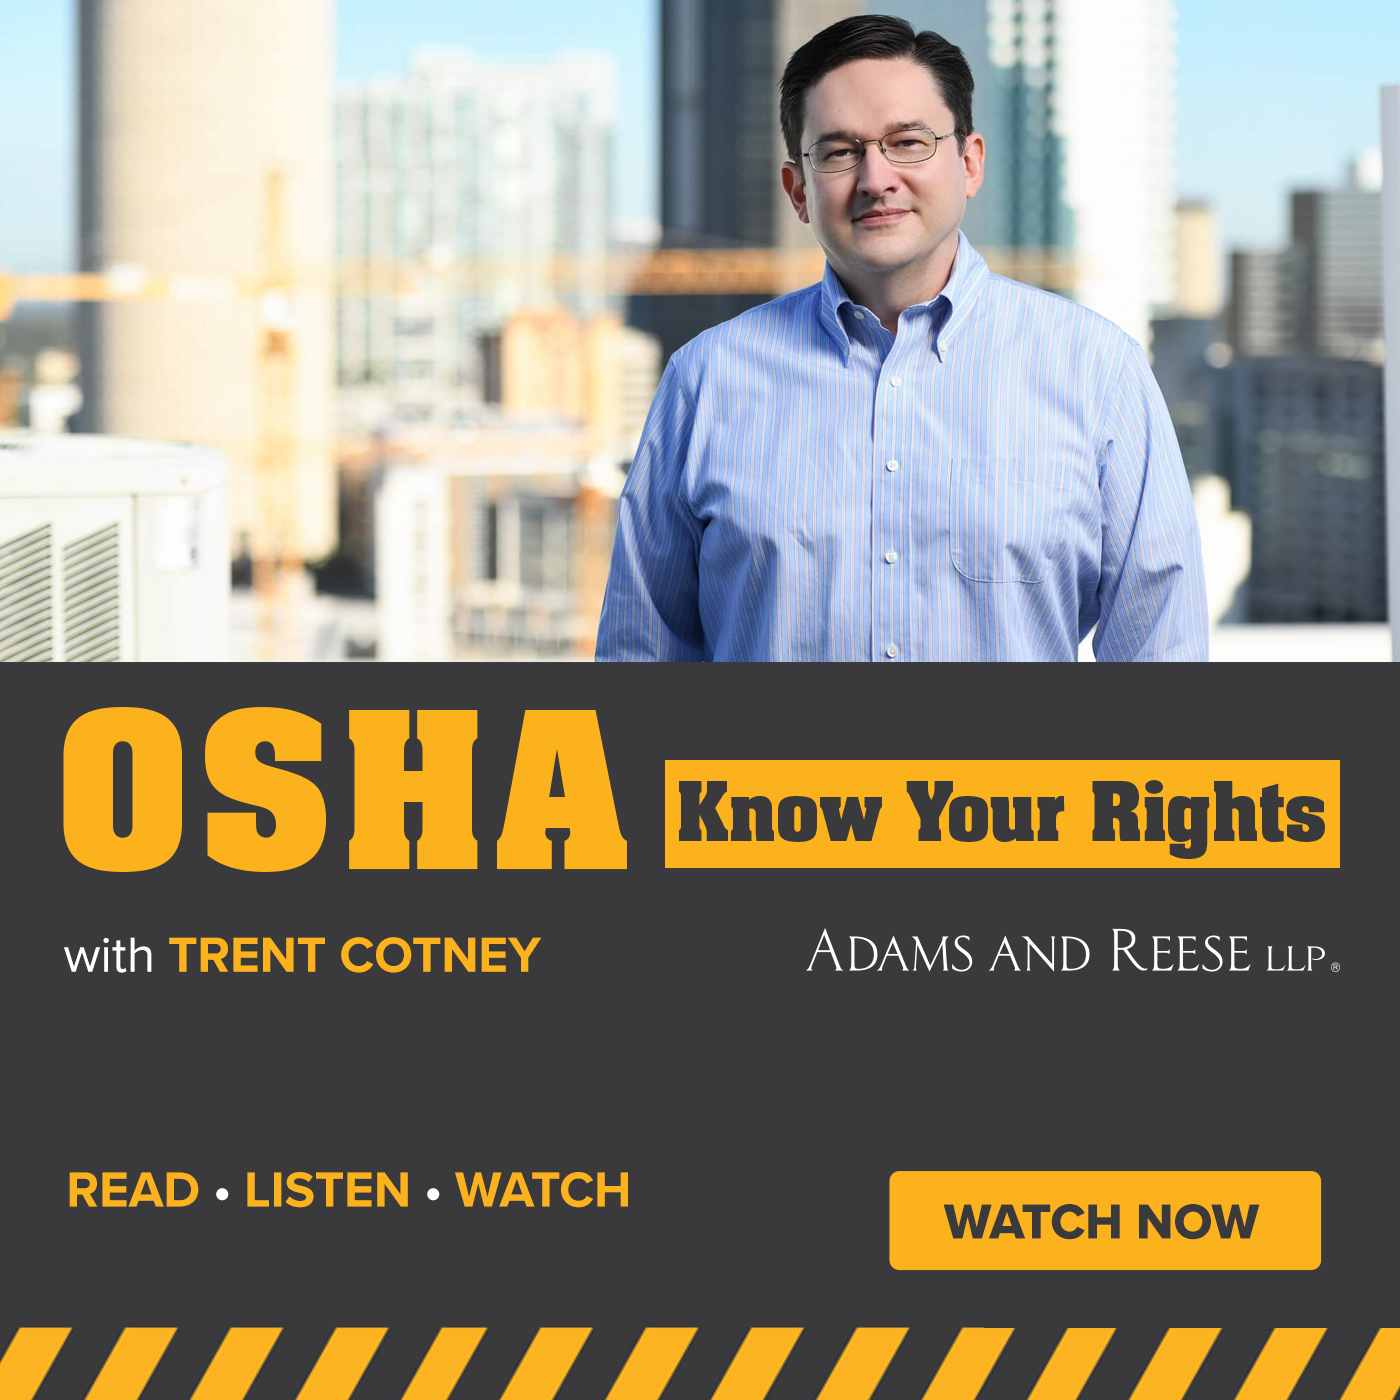 RLW-Trent Cotney OSHA-Know Your Rights - Watch - POD